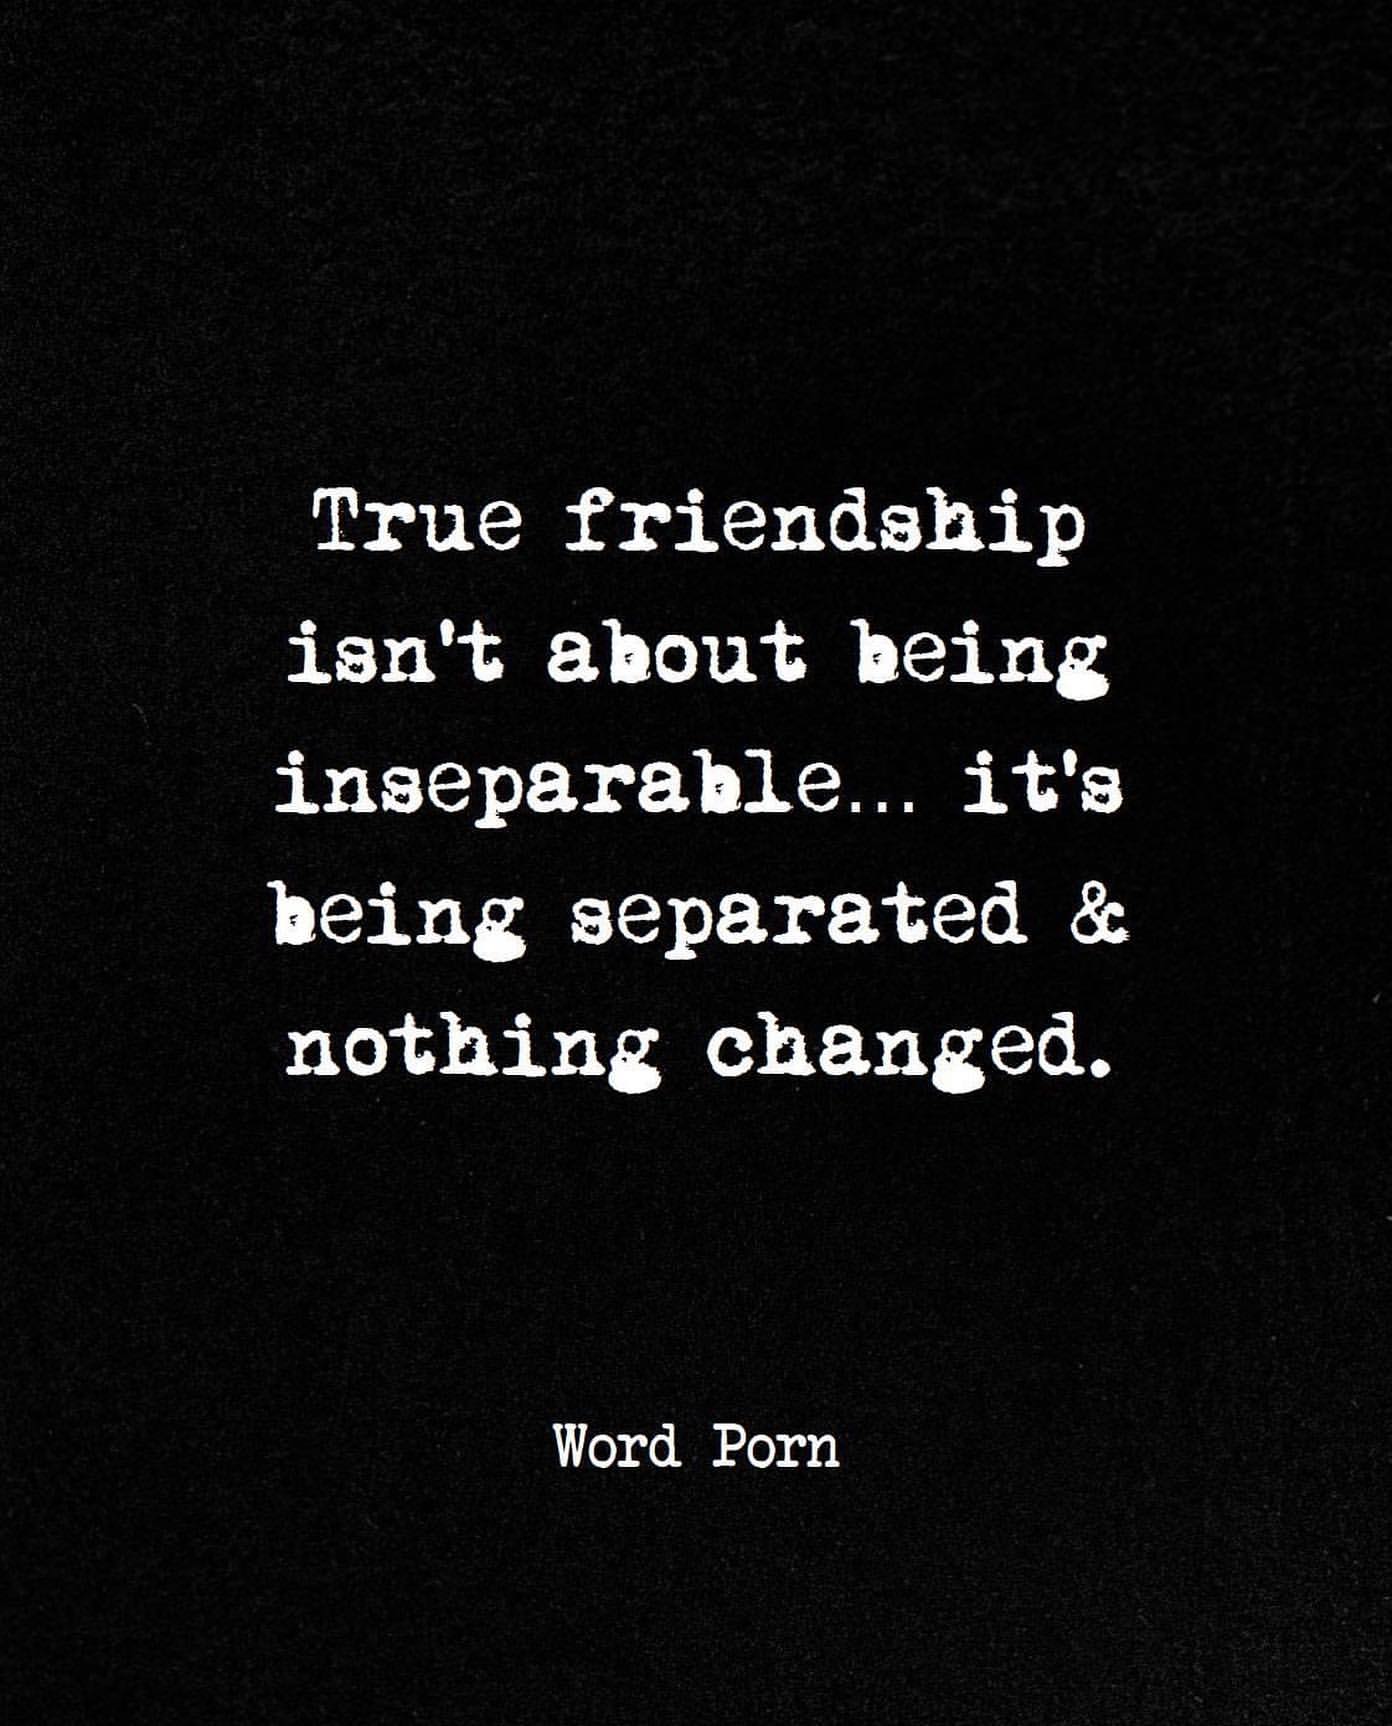 True friendship isn't about being inseparable... it's being separated & nothing changed.